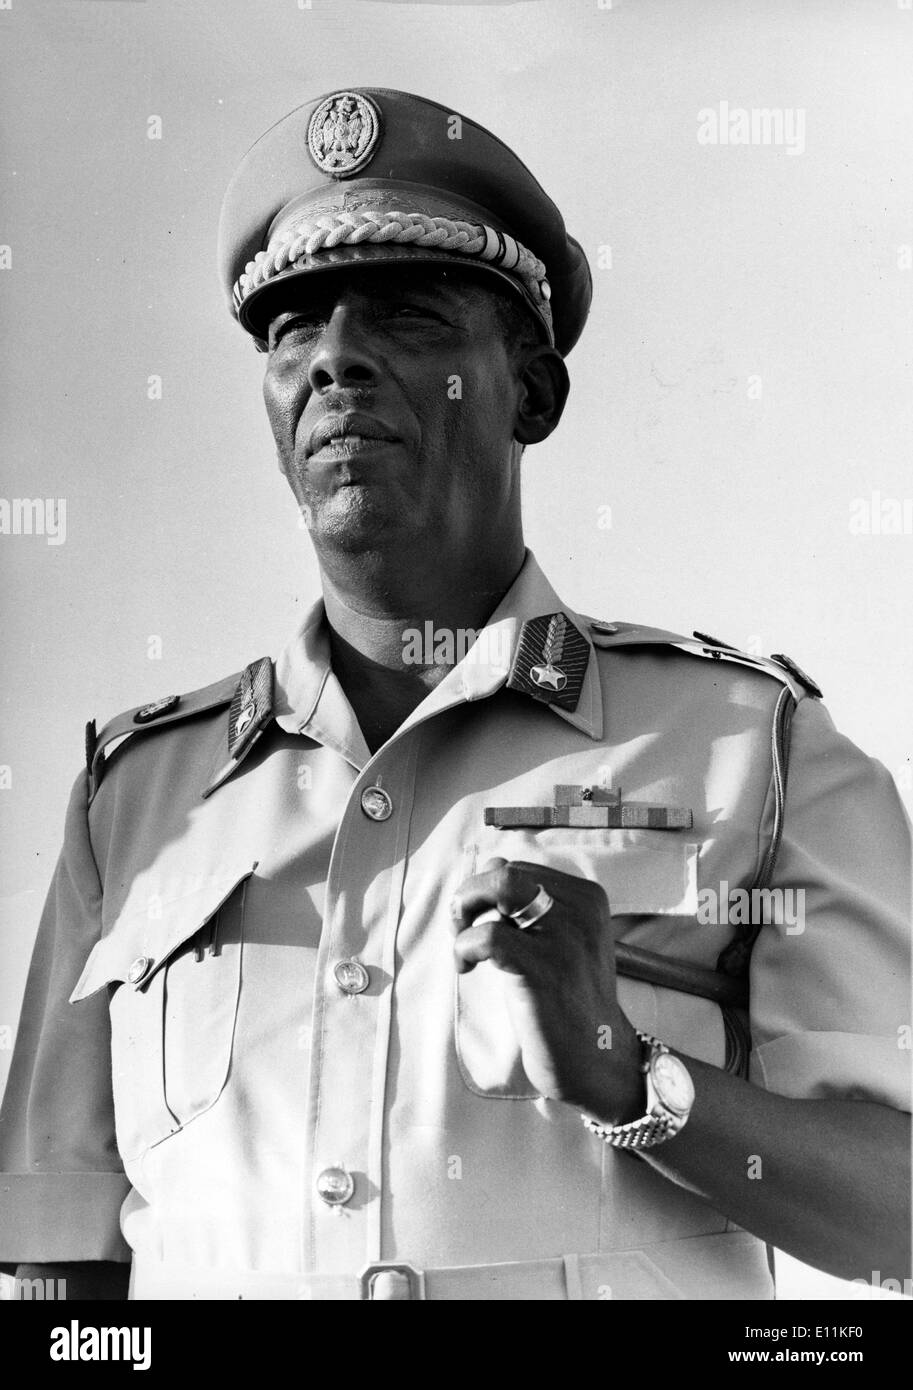 Sep 15, 1978; Mogadishu, Somalia; President of Somali Democratic Republic, General MOHAMED SIYAD BARRE, born in Lugh Ferrandu in 1919. Educated in Lugh Ferrandi, Mogadishu. Joined Police Force in 1941. Regional Divisional Commander in 1950. Sent to Italian Military Academy in 1959. Colonel, Deputy Commander of the Army in 1965. President of the Supreme Revolutionary Council in 1969. Resigned as C-in-C in 1970. Married and father of 20 children. Stock Photo